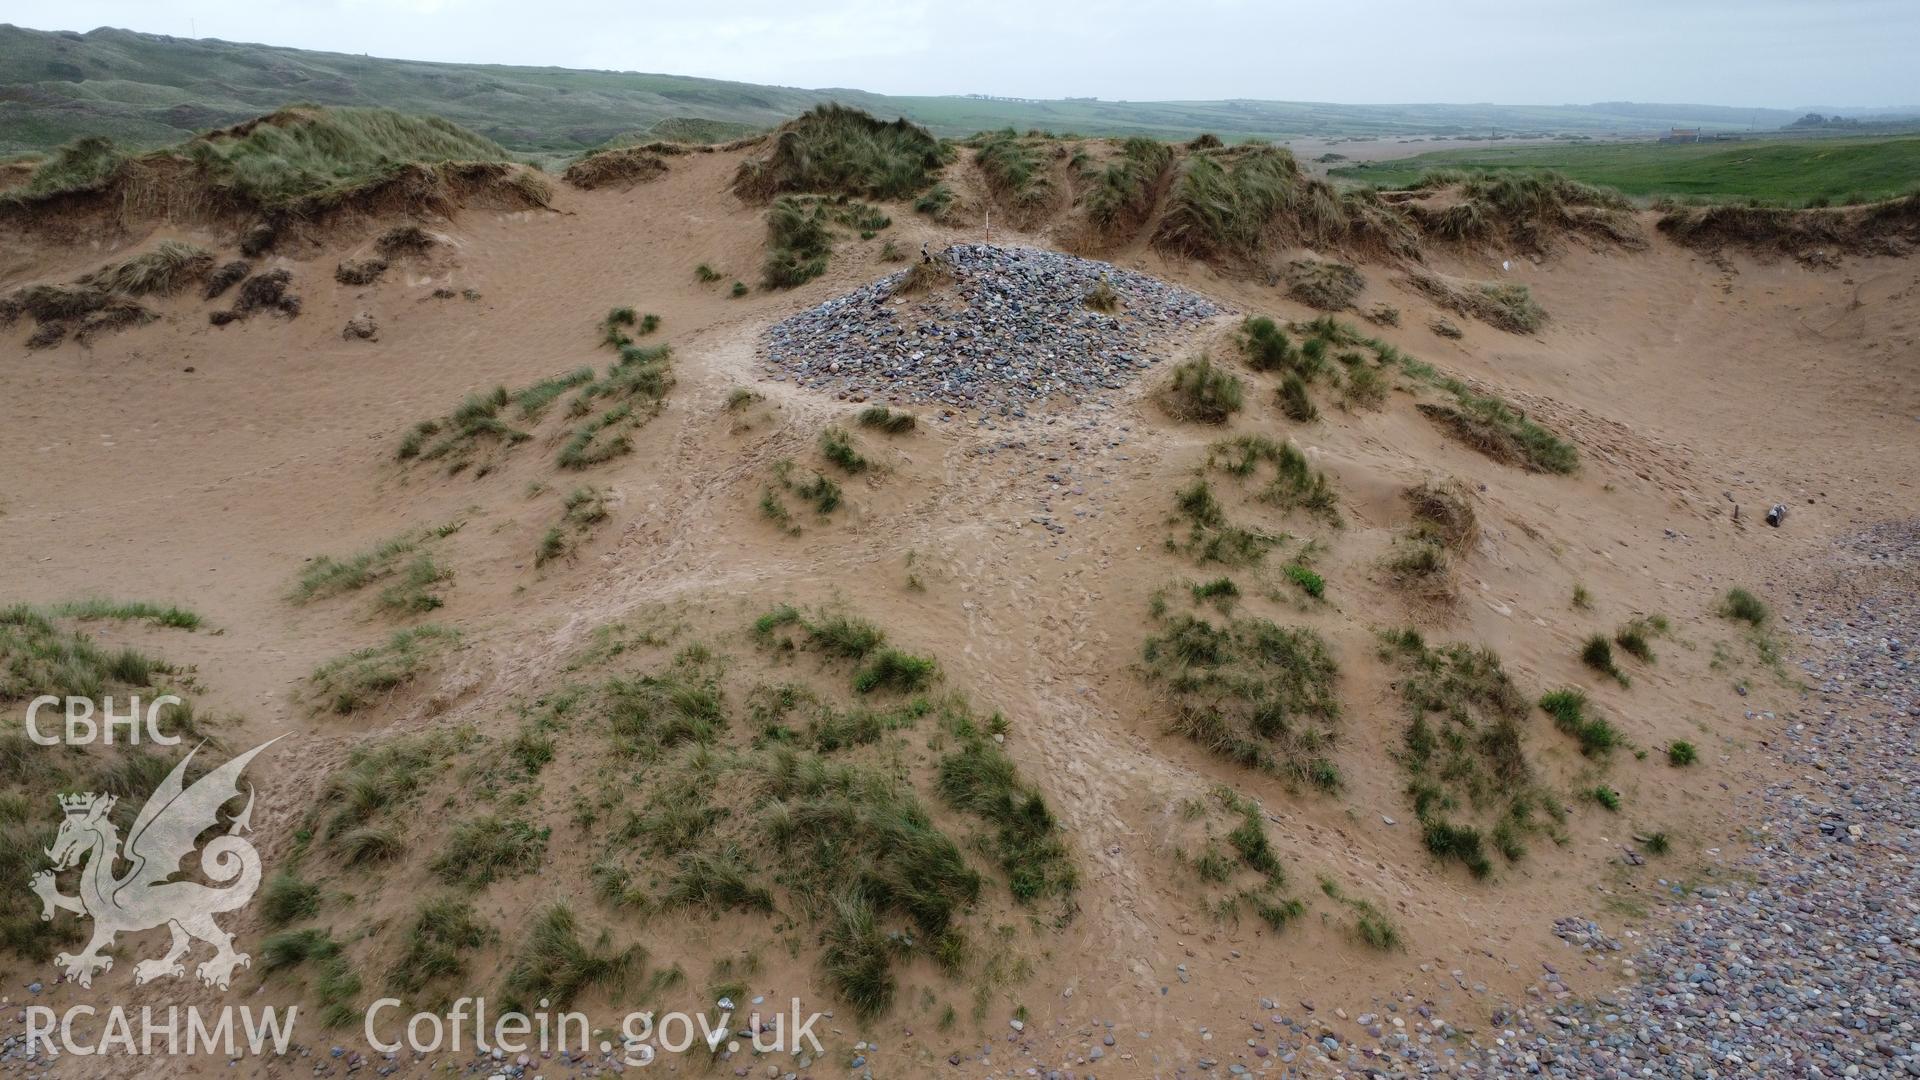 Dobby's Grave, oblique view, looking north-east with sand dunes in the background.